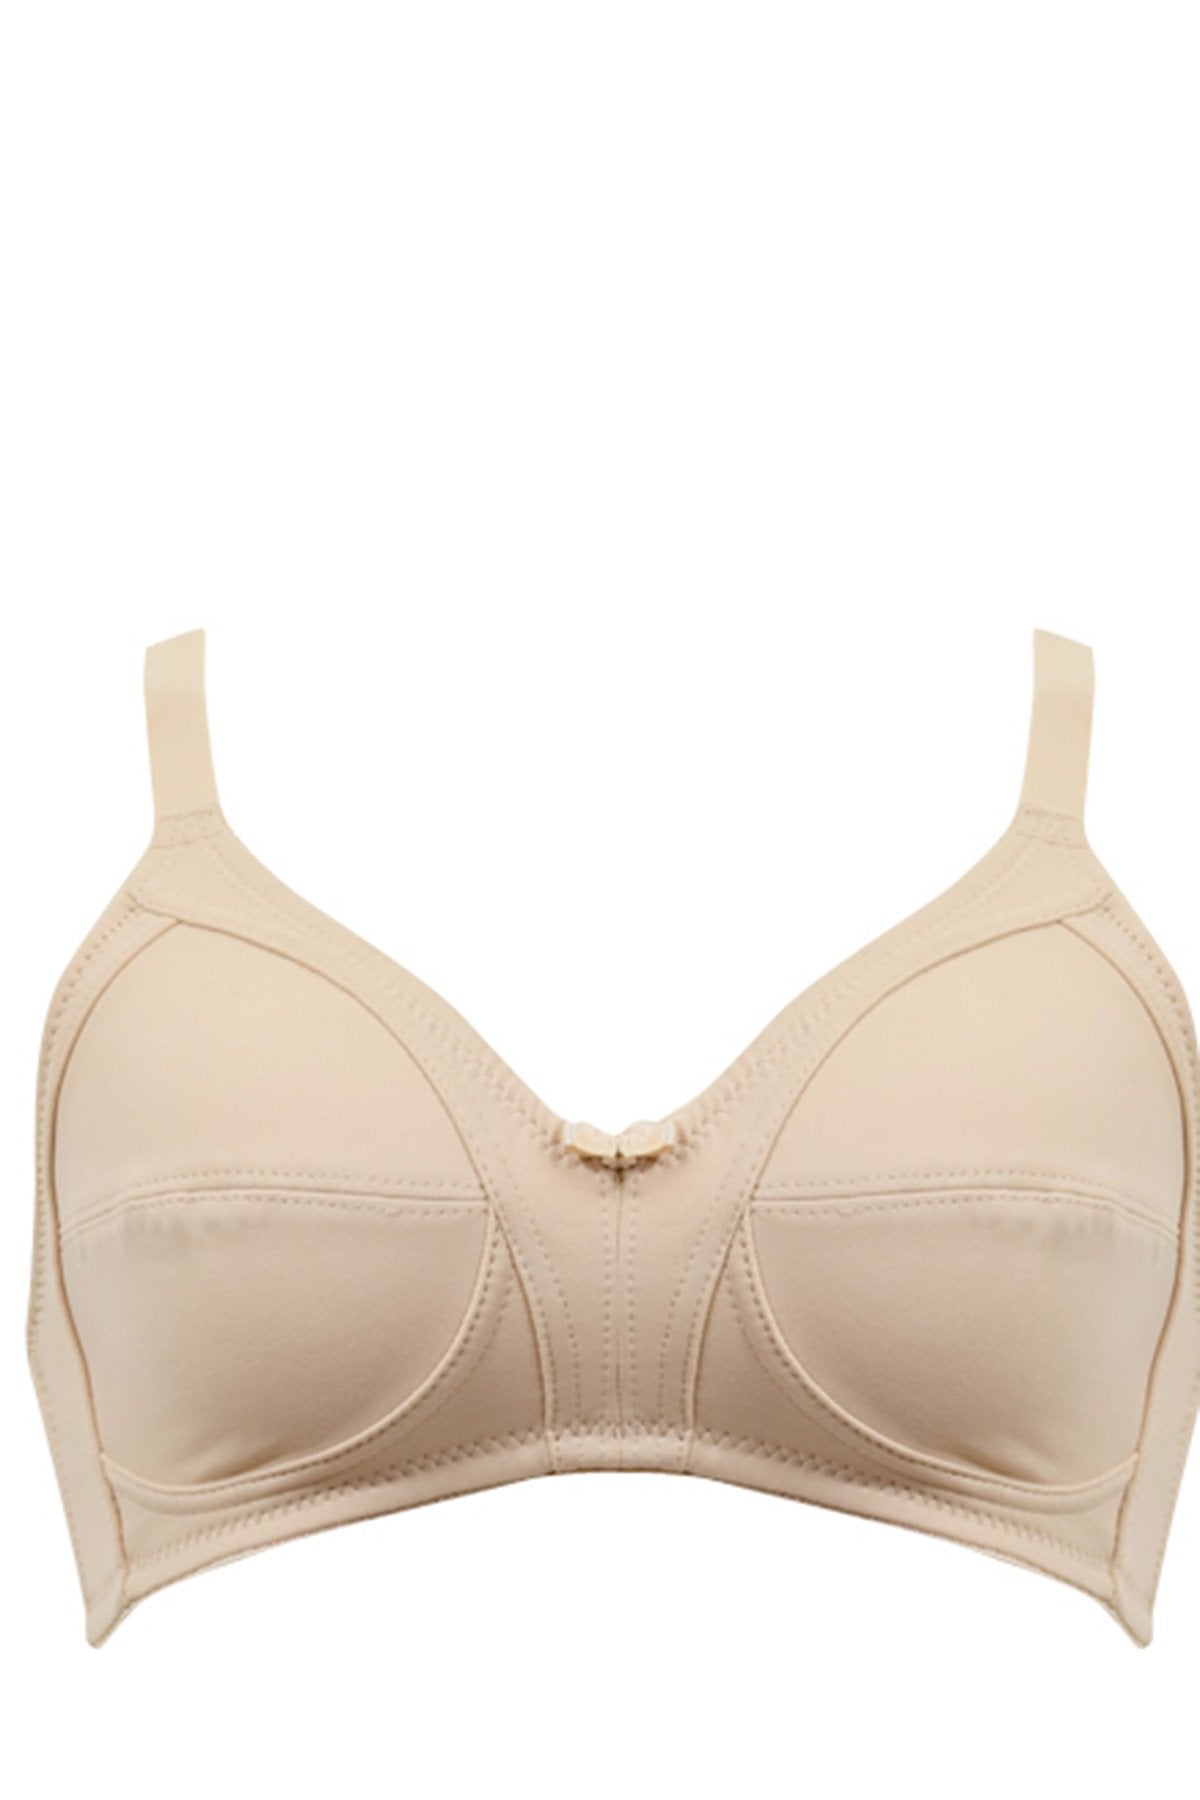 BLS - Cansu Non Wired And Non Padded Cotton Bra - Skin